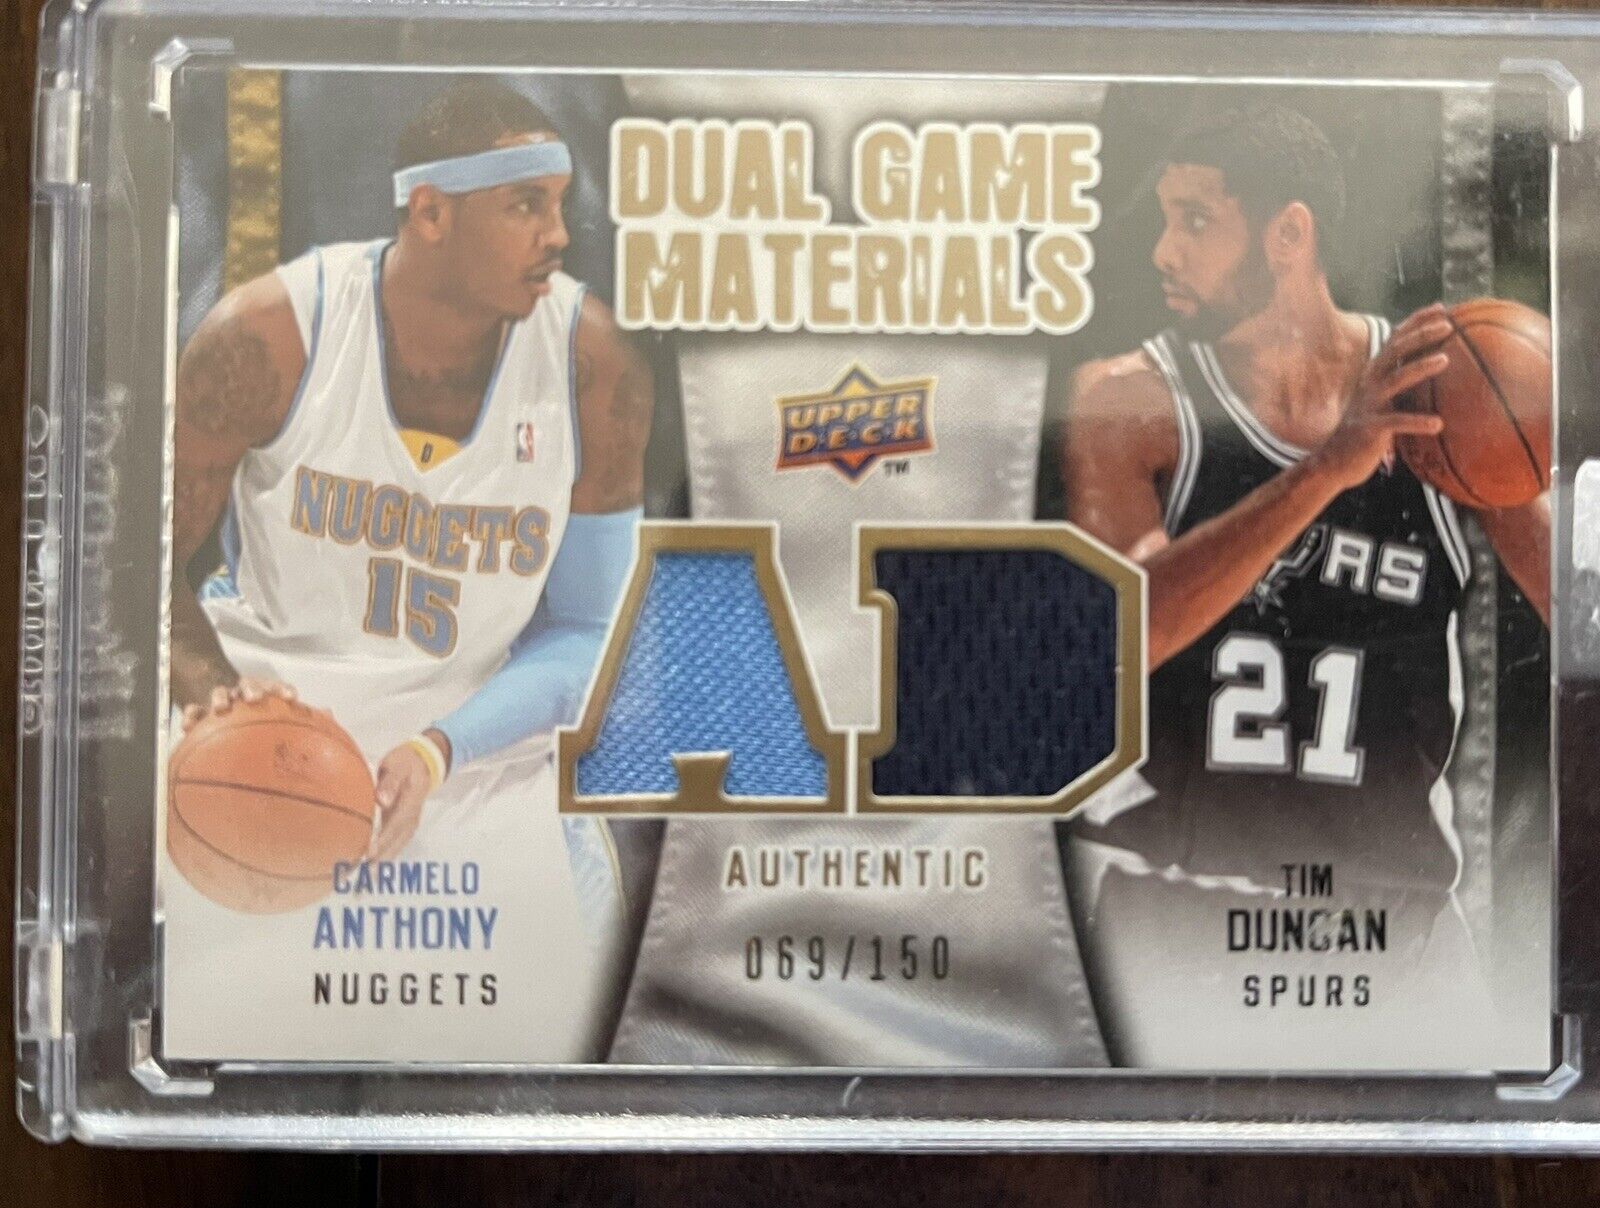 2009 Upper Deck Carmelo Anthony Tim Duncan Dual Game Materials Gold #69/150